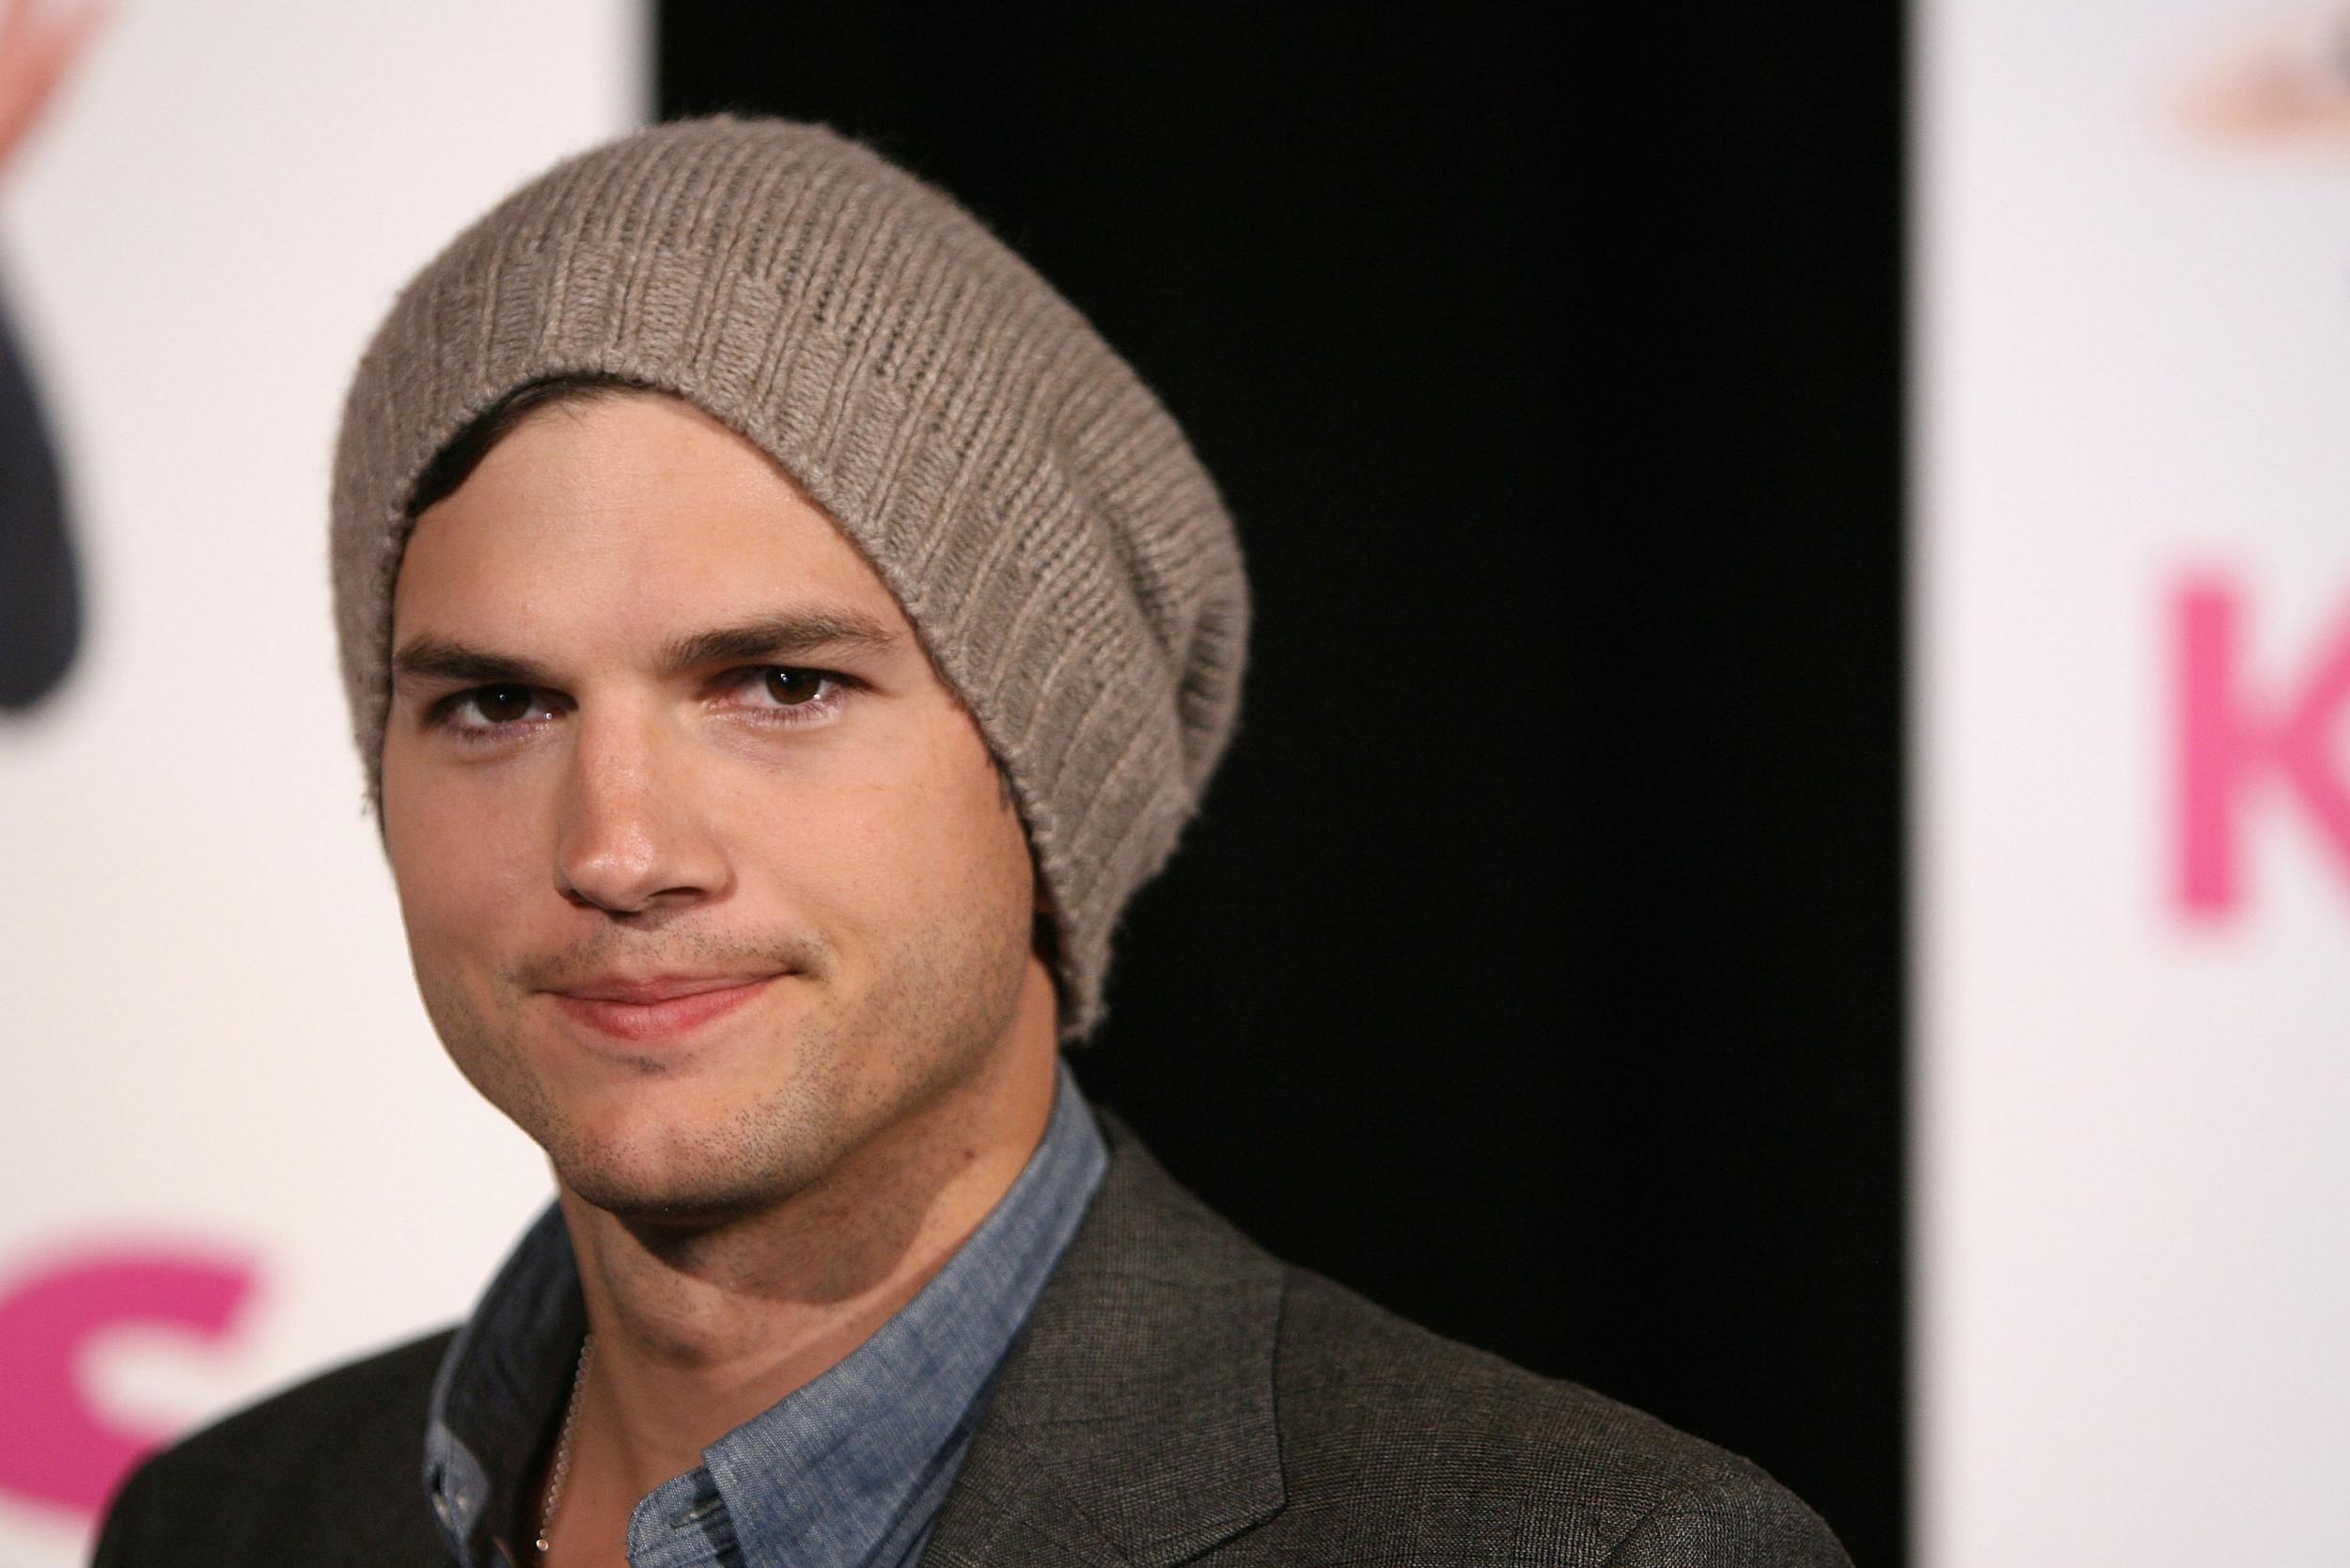 Ashton Kutcher says hes helped identify 6,000 child sex abuse victims The Independent The Independent